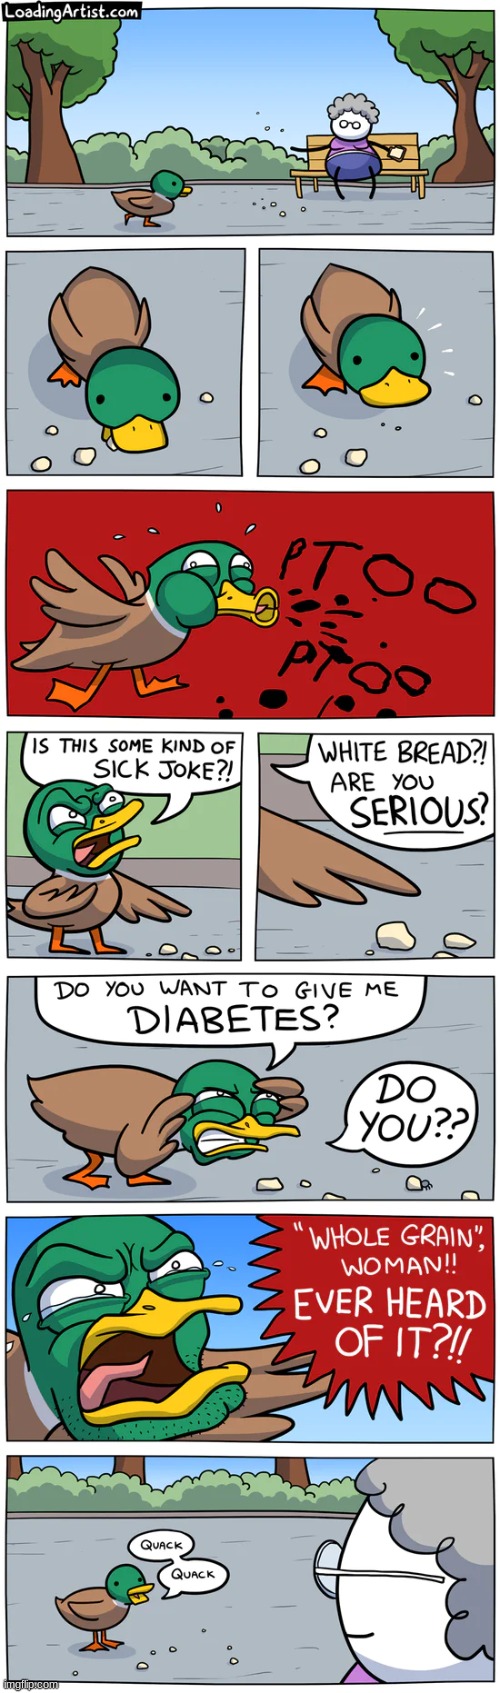 A duck's POV | image tagged in comics/cartoons,funny | made w/ Imgflip meme maker